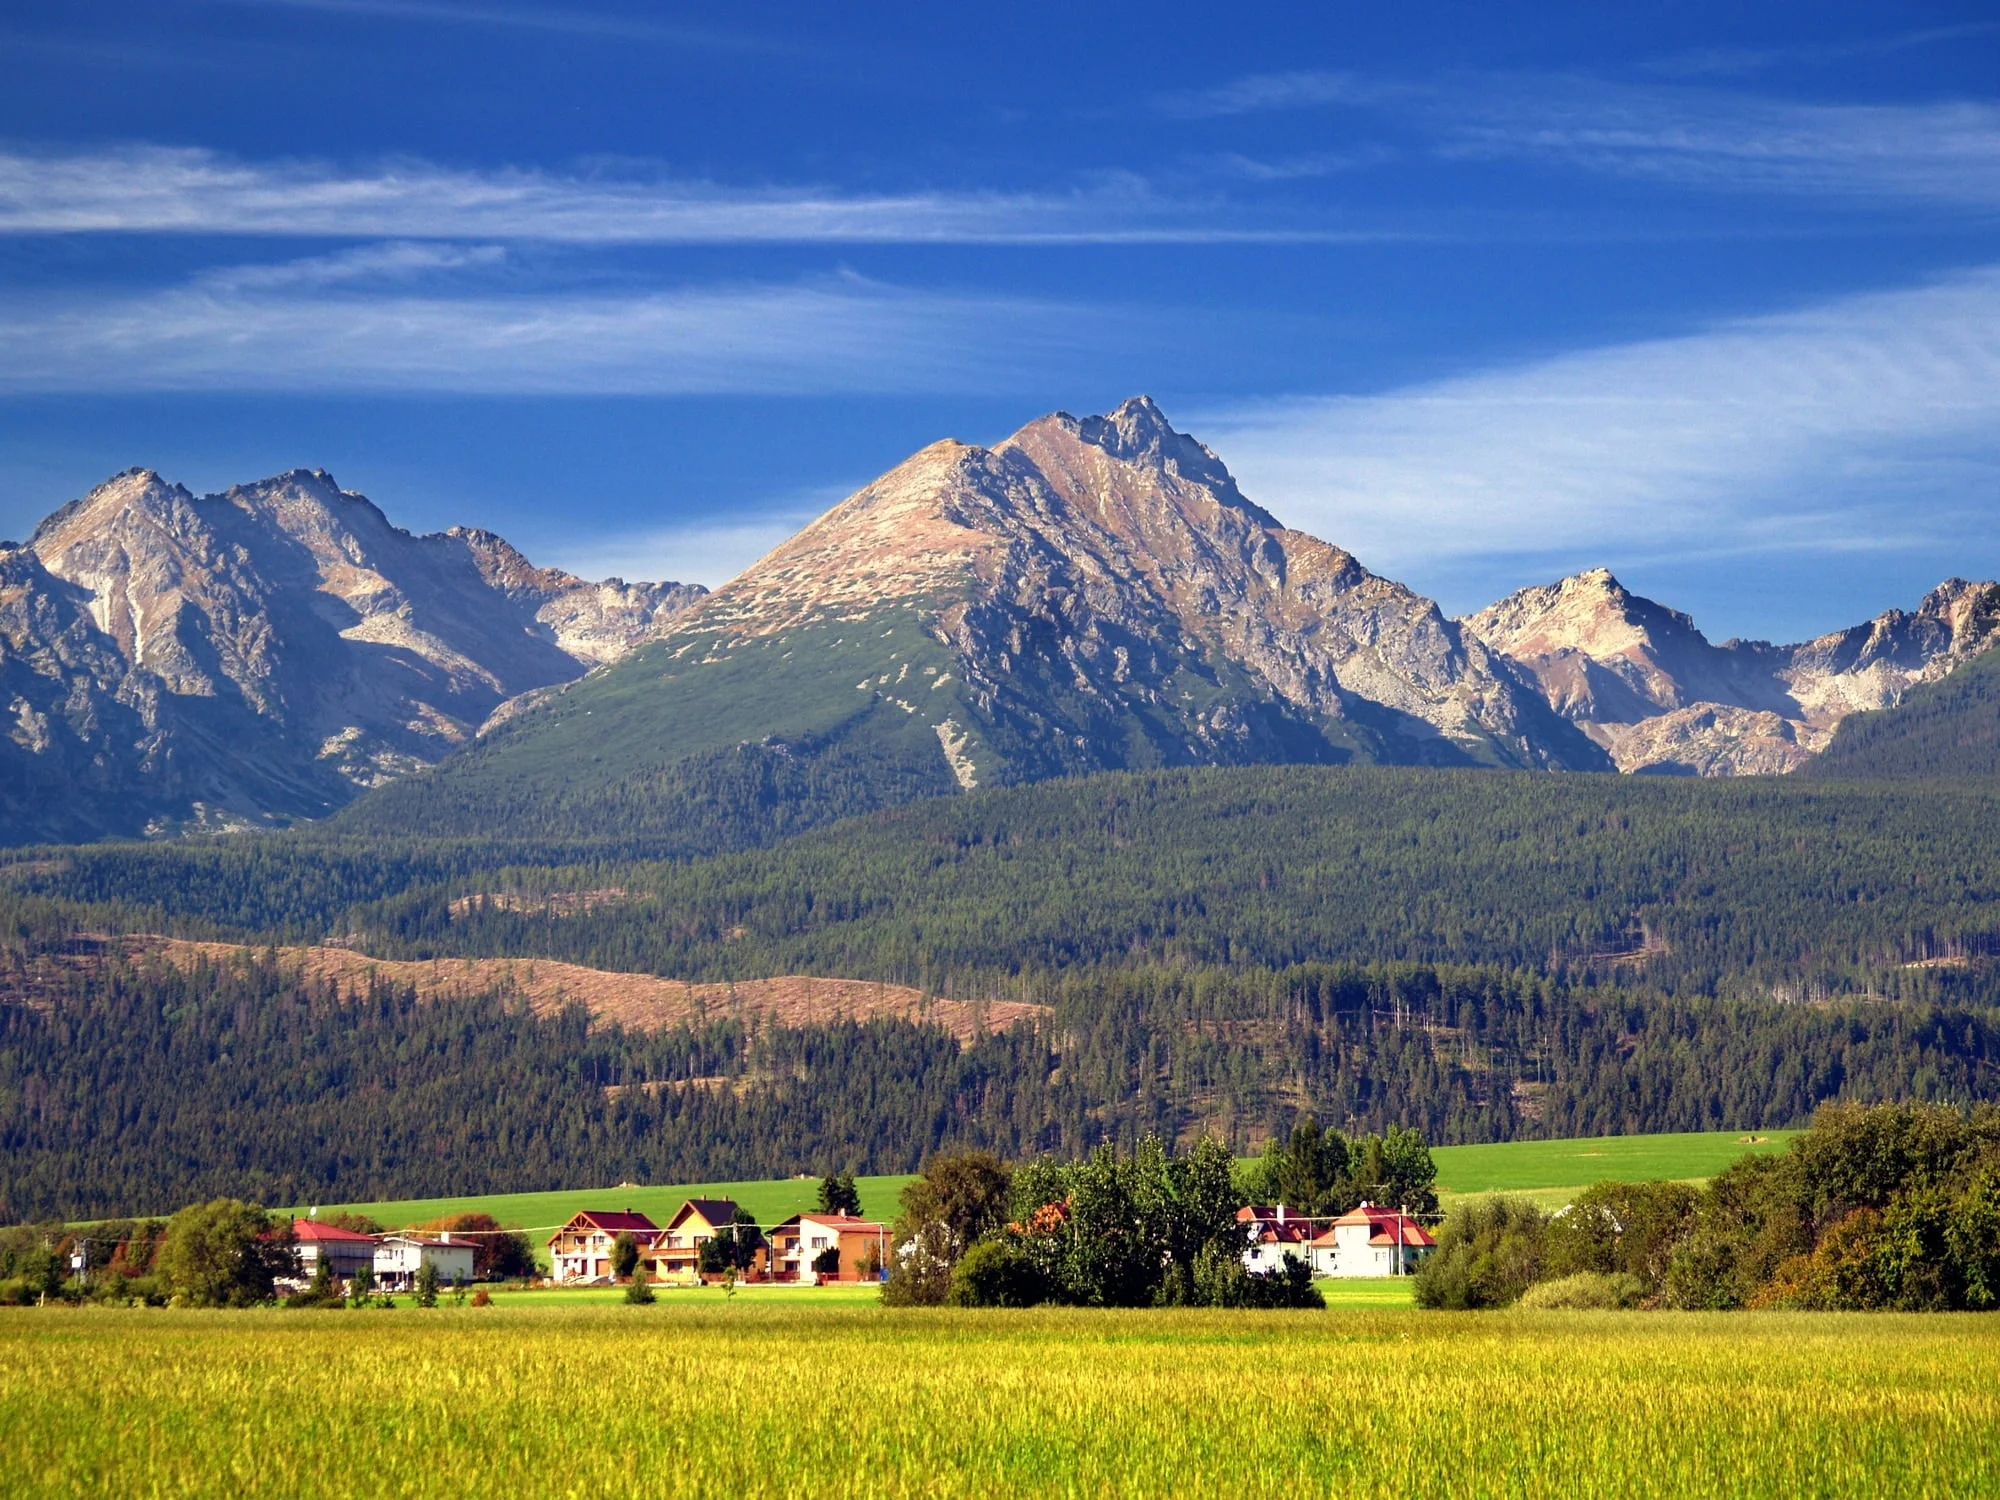 A view of The Tatra Mountains and village in summer, Slovakia.